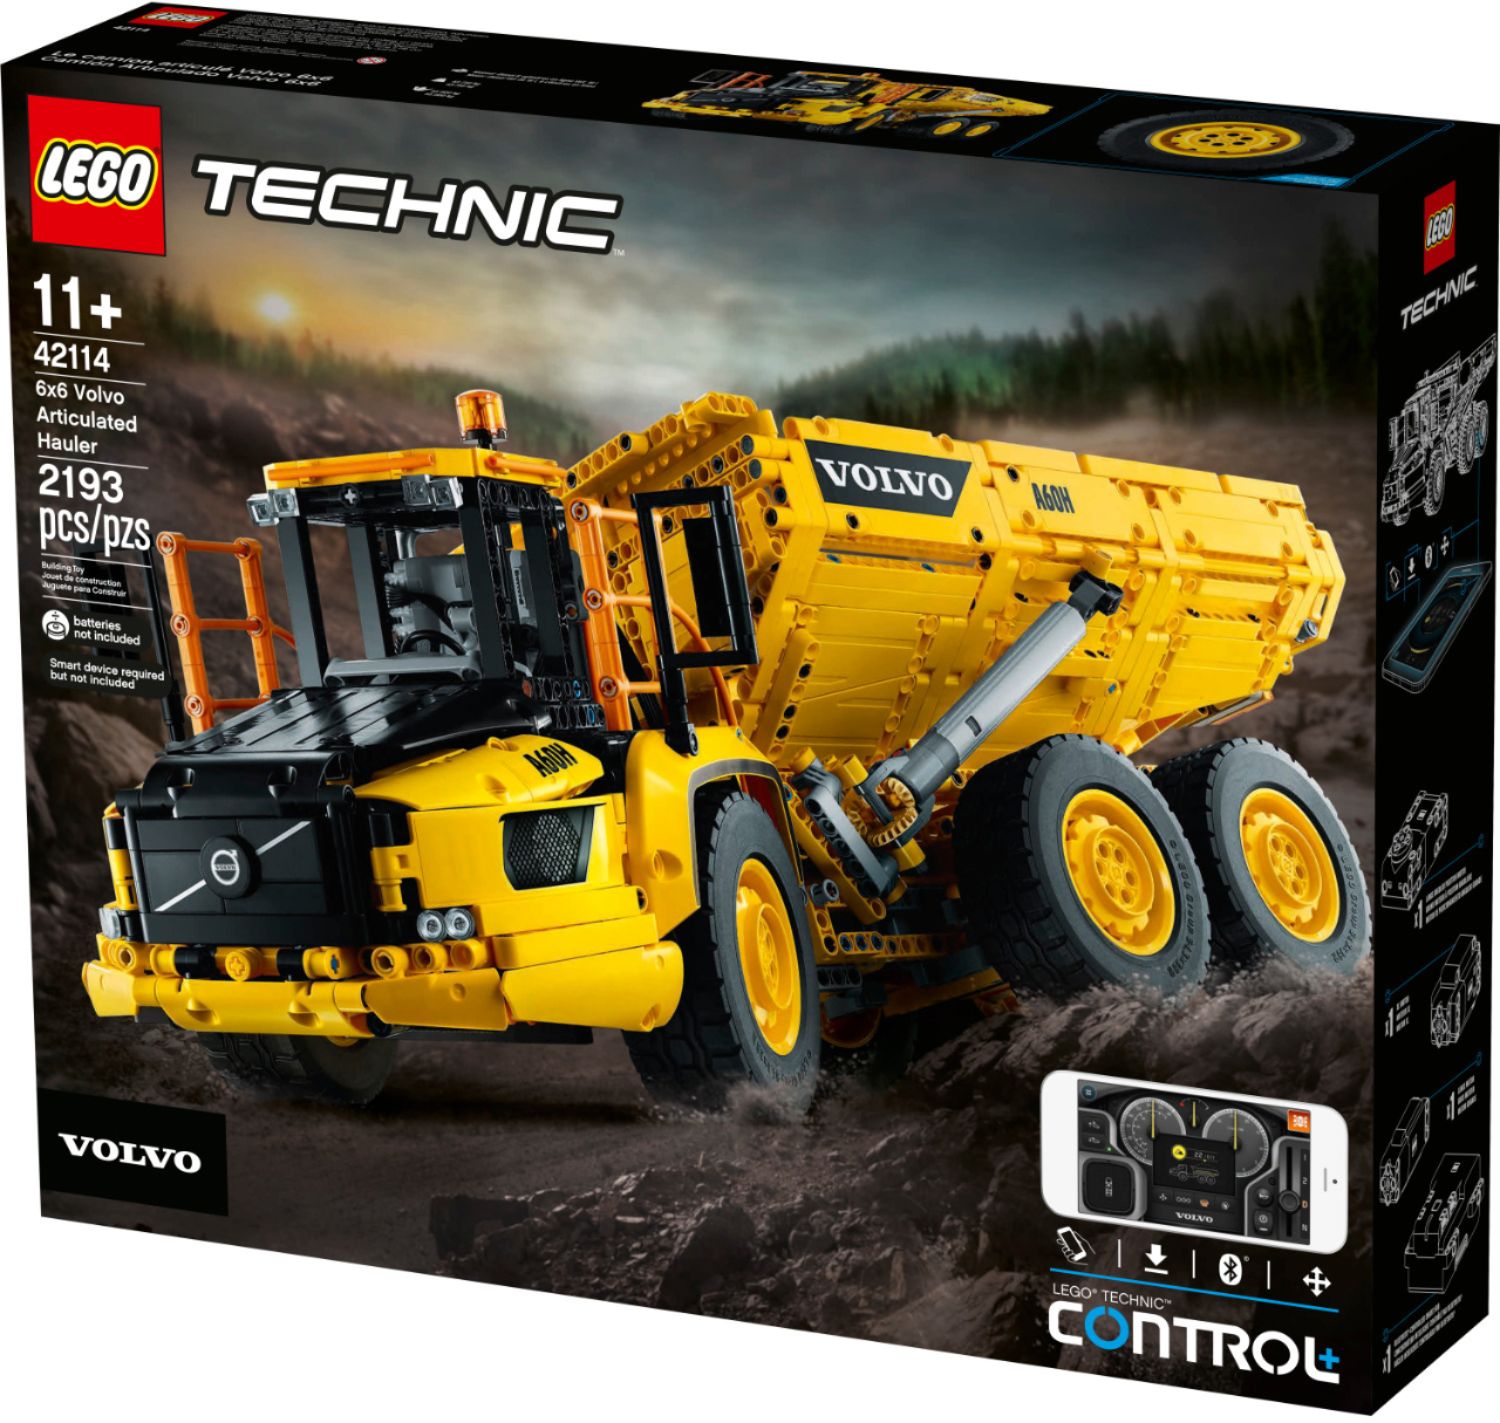 Buy LEGO Technic - 6x6 Volvo Articulated Hauler (42114) from